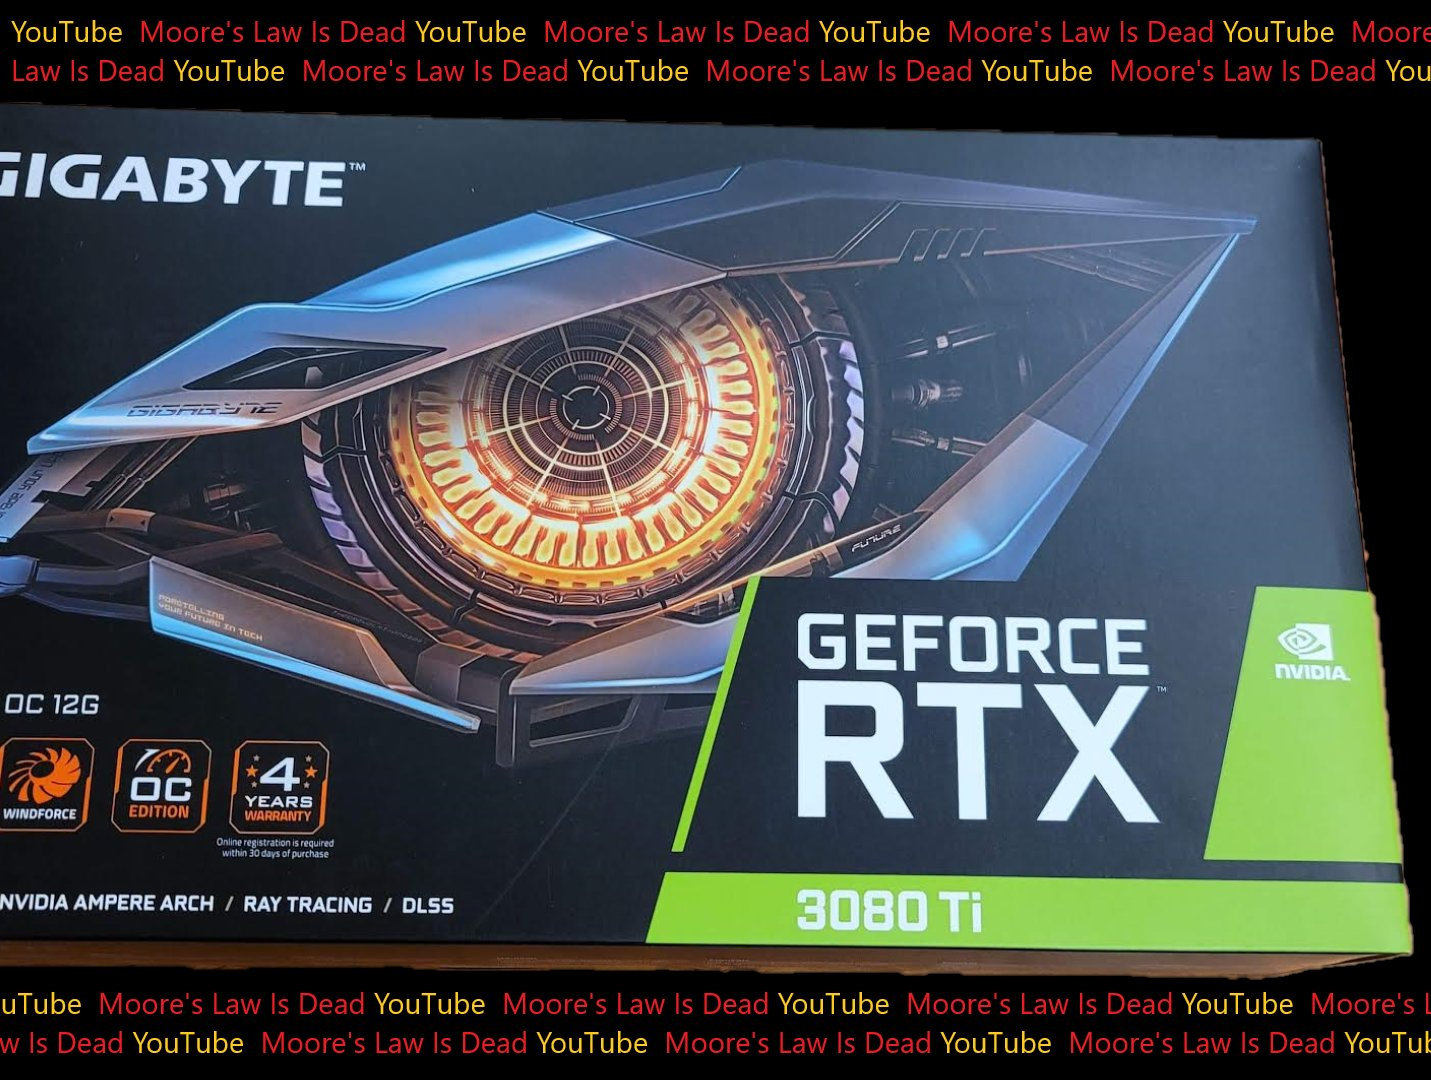 Gigabyte GeForce RTX 3080 Ti Gaming OC with 12GB memory has been 